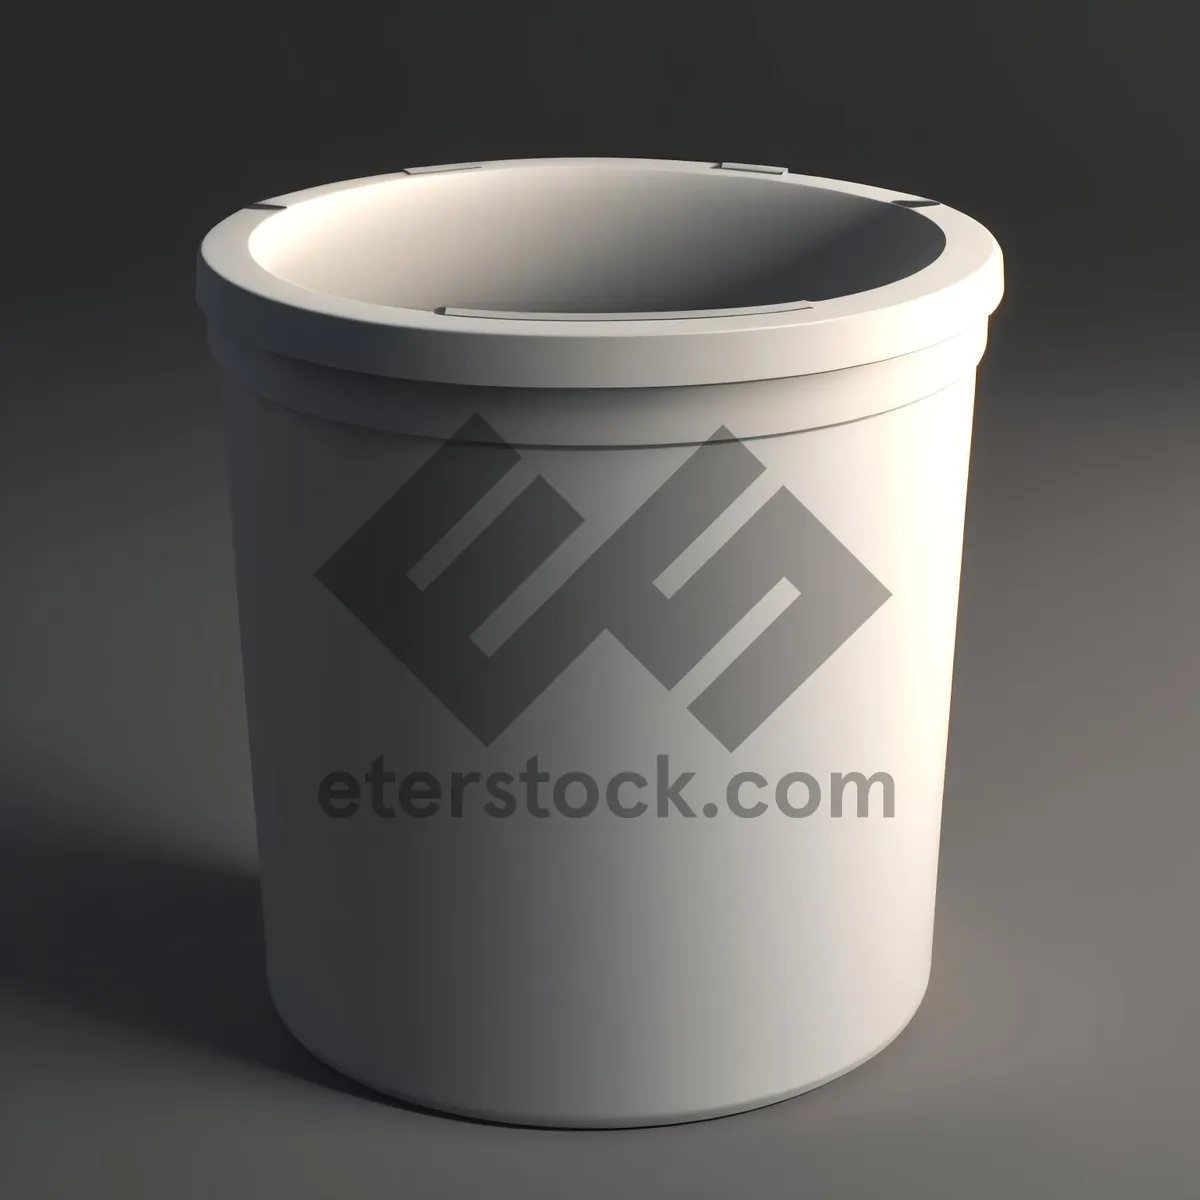 Picture of Empty coffee mug on table.